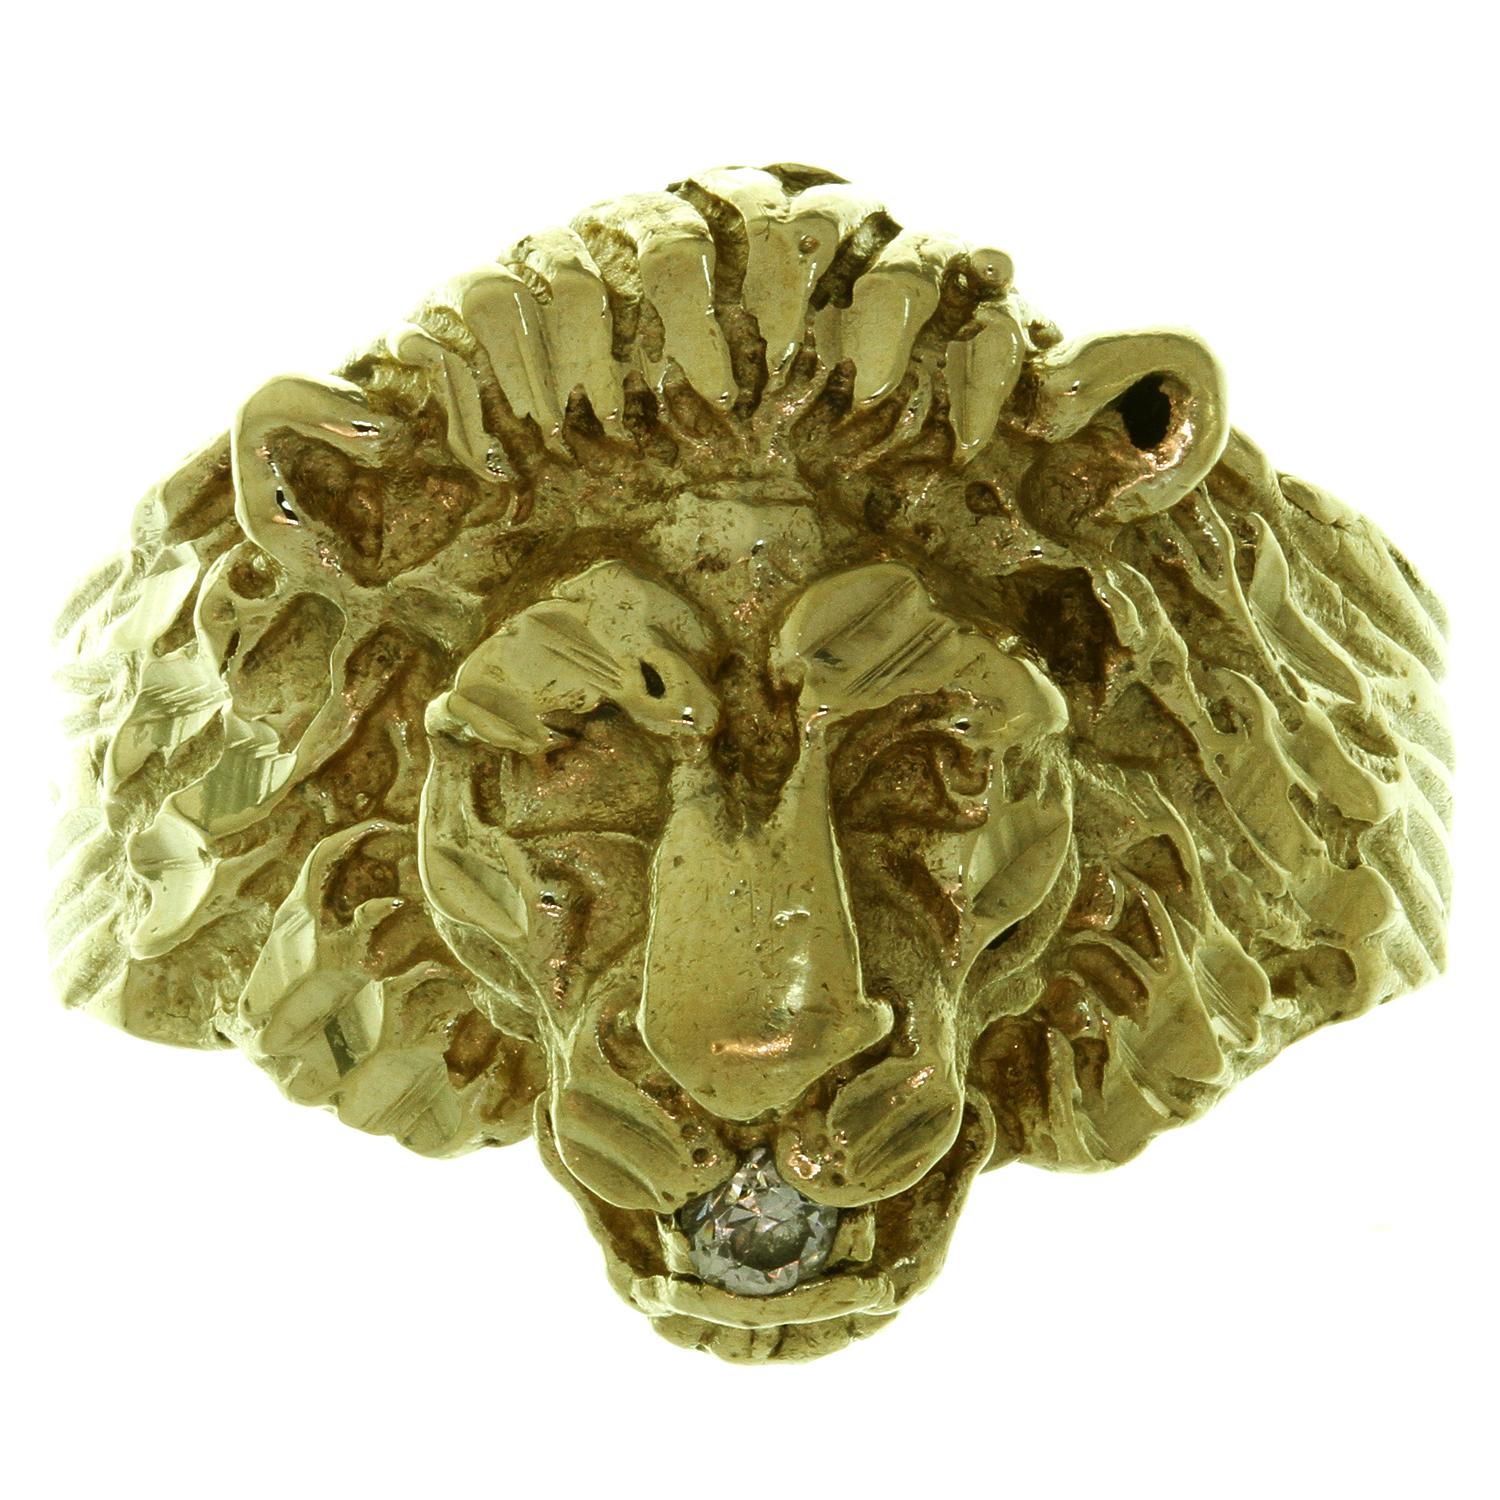 This fabulous vintage men's ring features the shape of a lion's head crafted in 14k yellow gold and accented with a solitaire round diamond of an estimated 0.06 carats. Made in United States circa 1970s. Measurements: 0.75